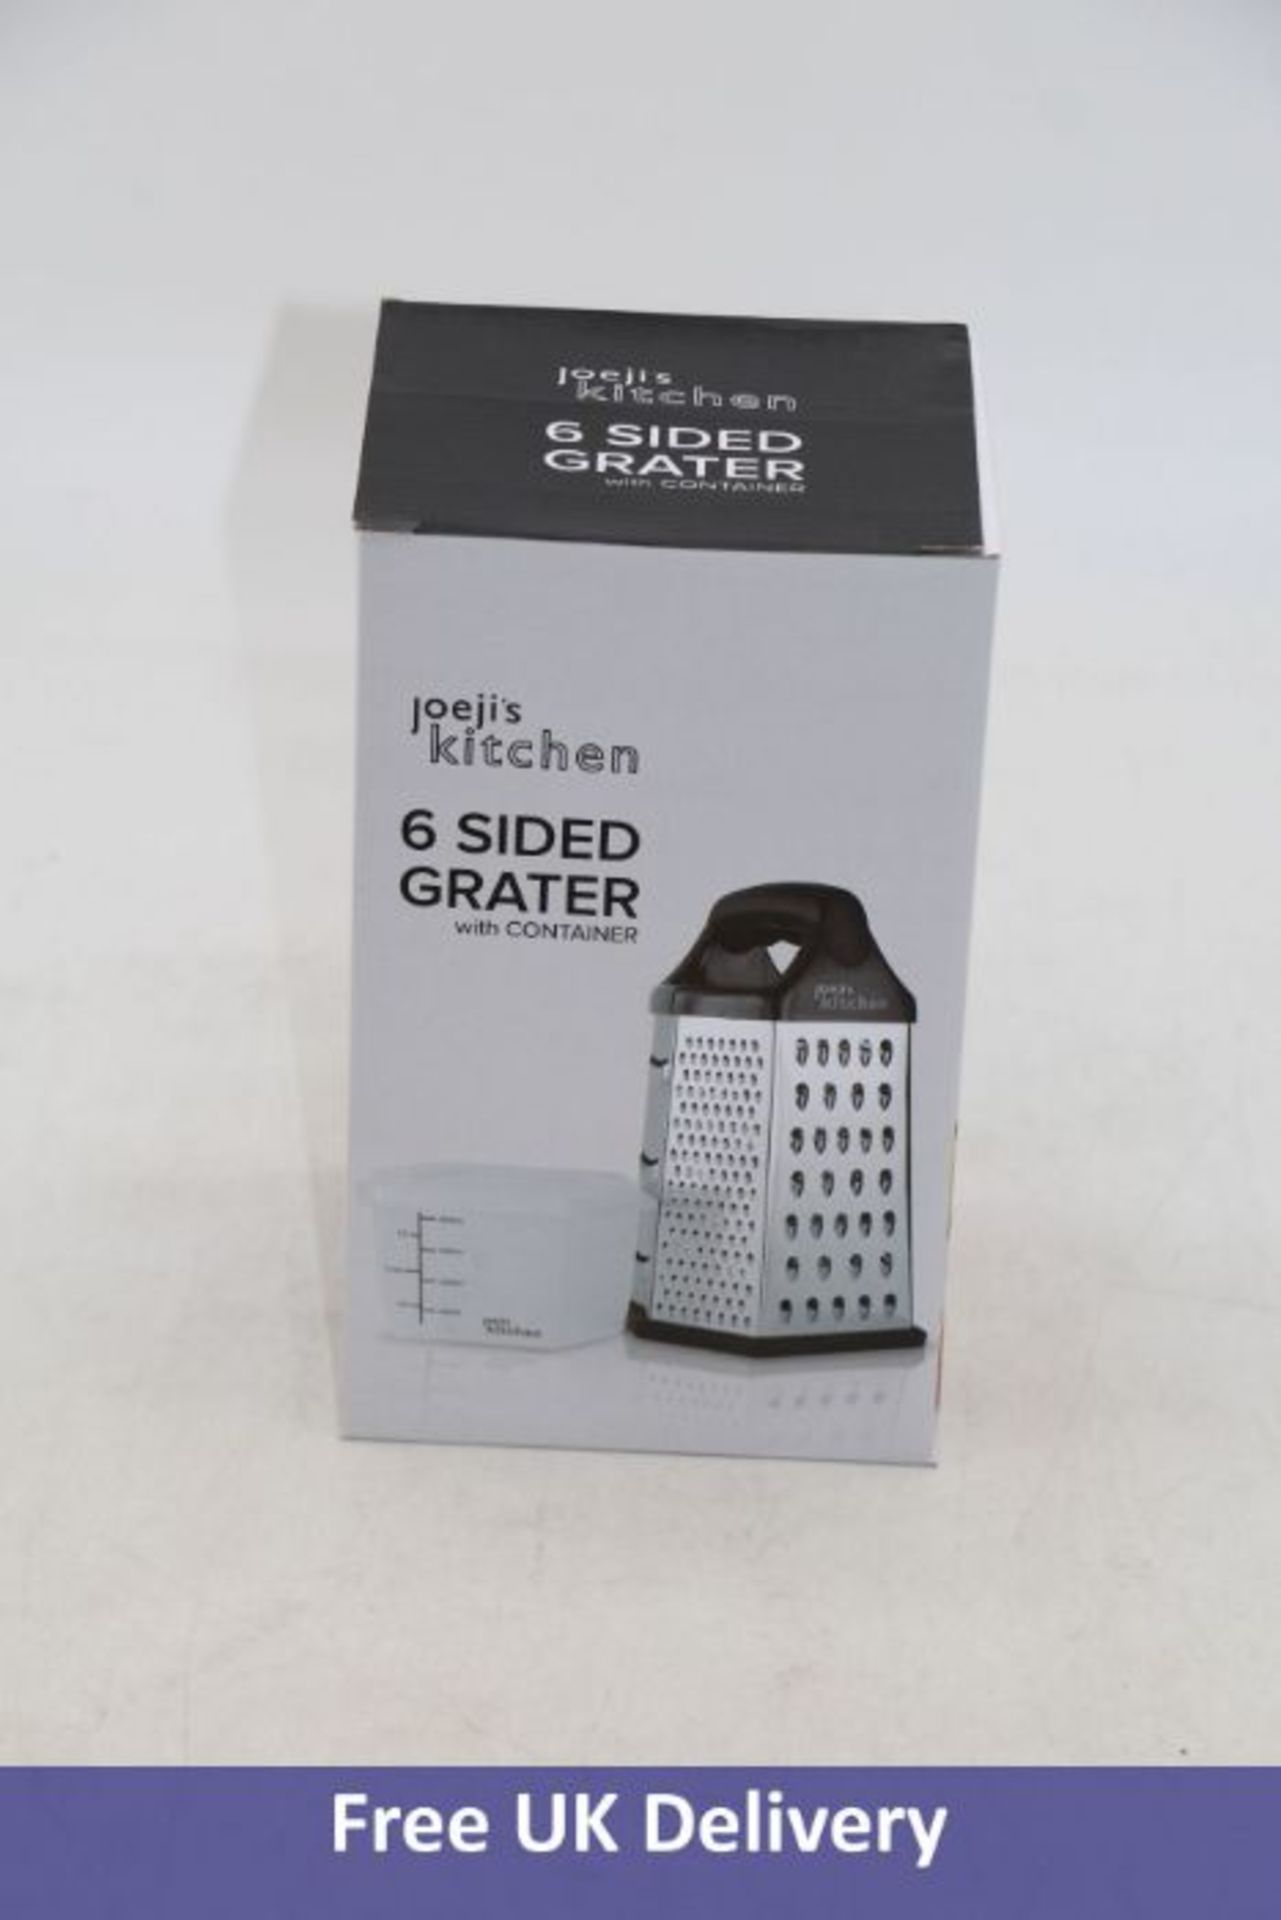 Twenty-four Joeji's Kitchen 6 Side Grater with Container